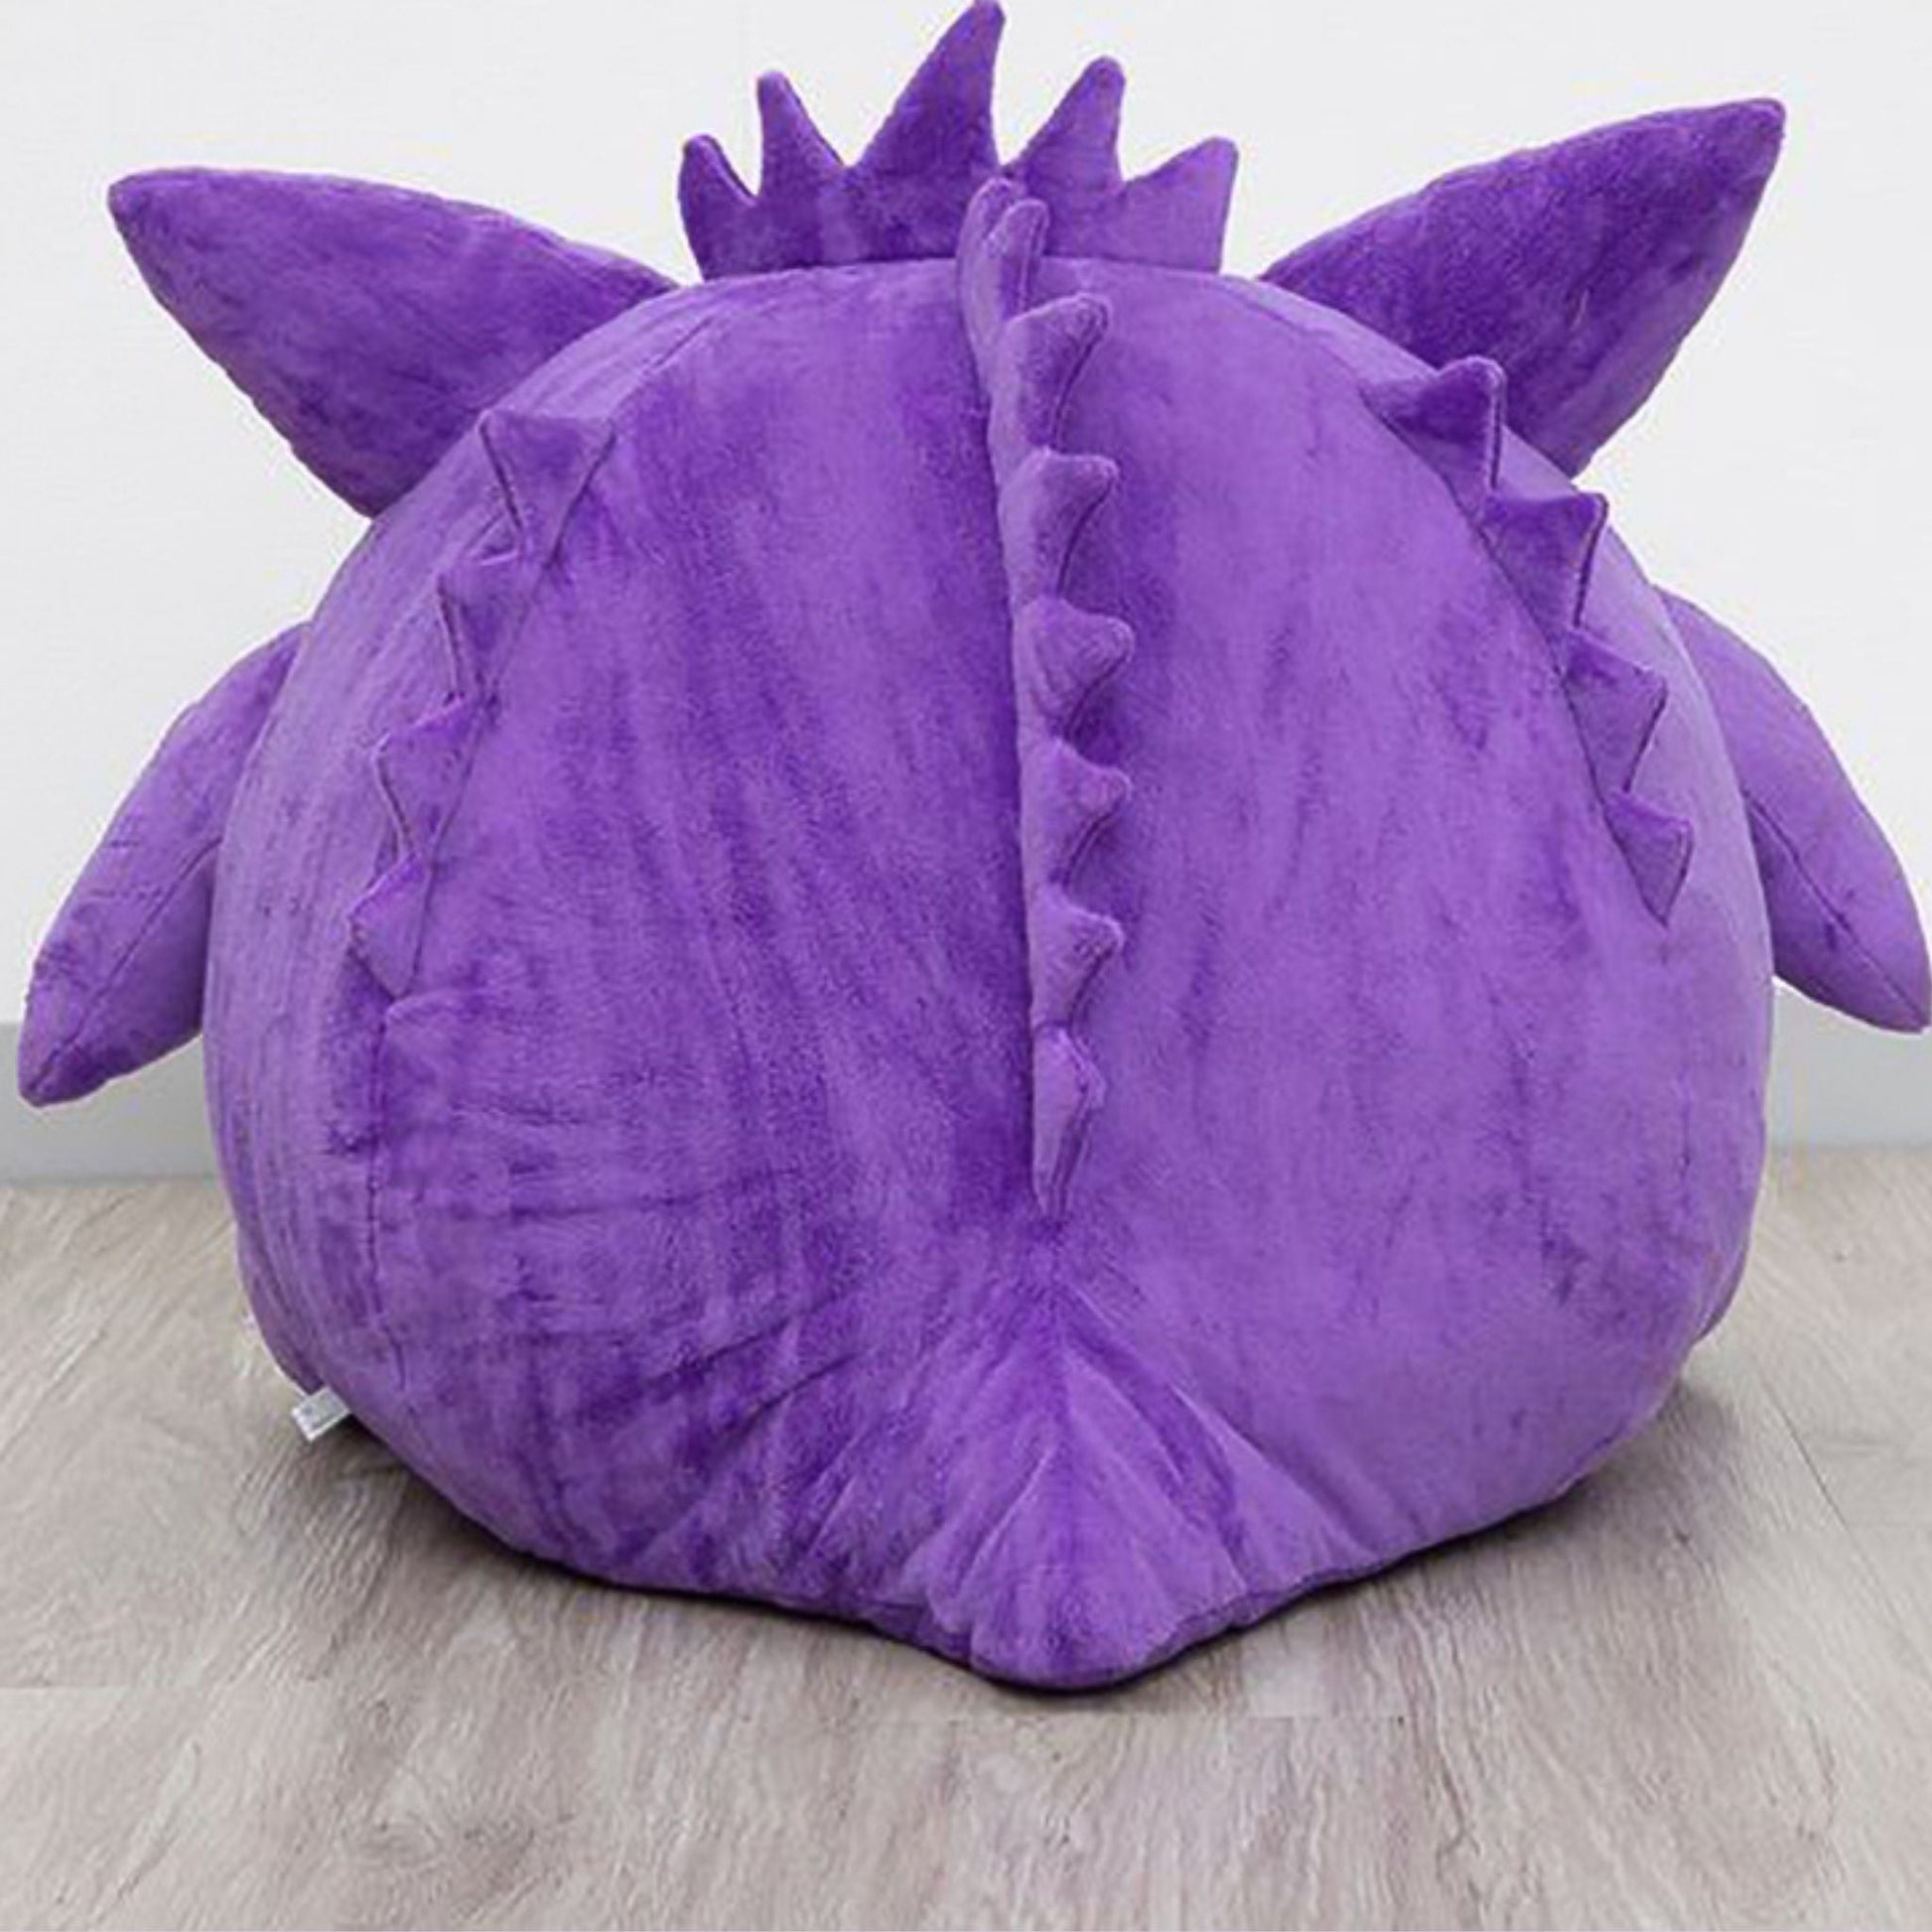 Back Image - Gengar Tongue Pillow Blanket Sleeping Pod For Afternoon Naps. Portable design for travel, work and on the go napping. Perfect gift for Pokémon fans.